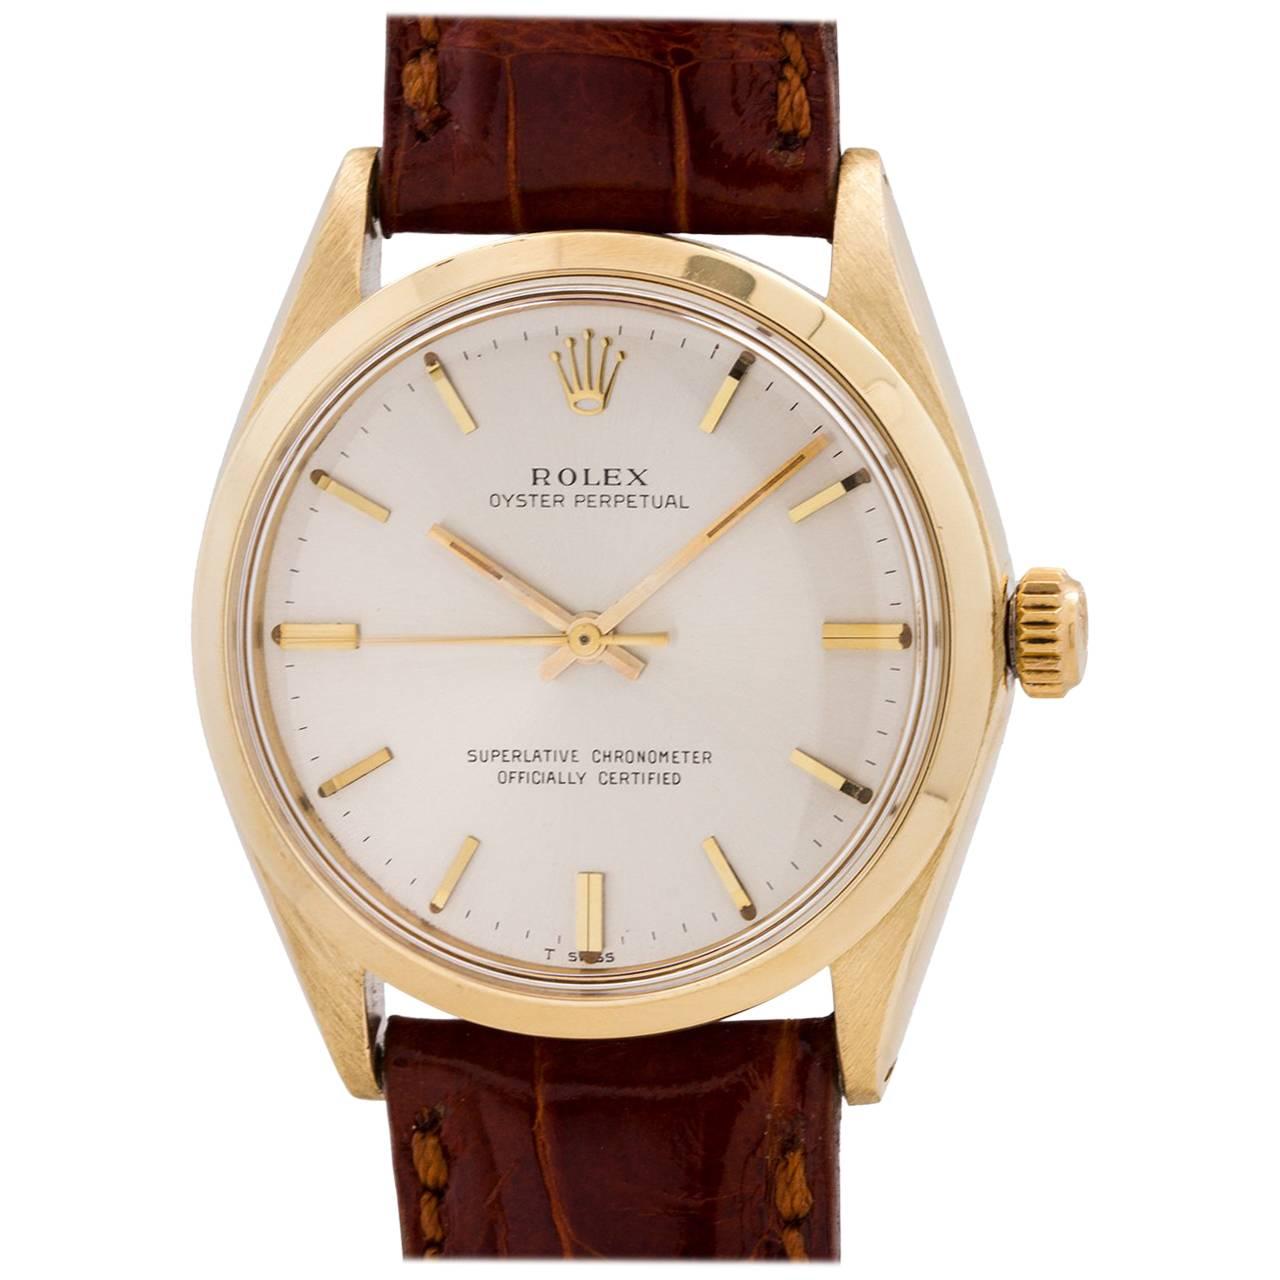 Rolex Yellow Gold Oyster Perpetual Self Winding Wristwatch Ref 1002, circa 1965